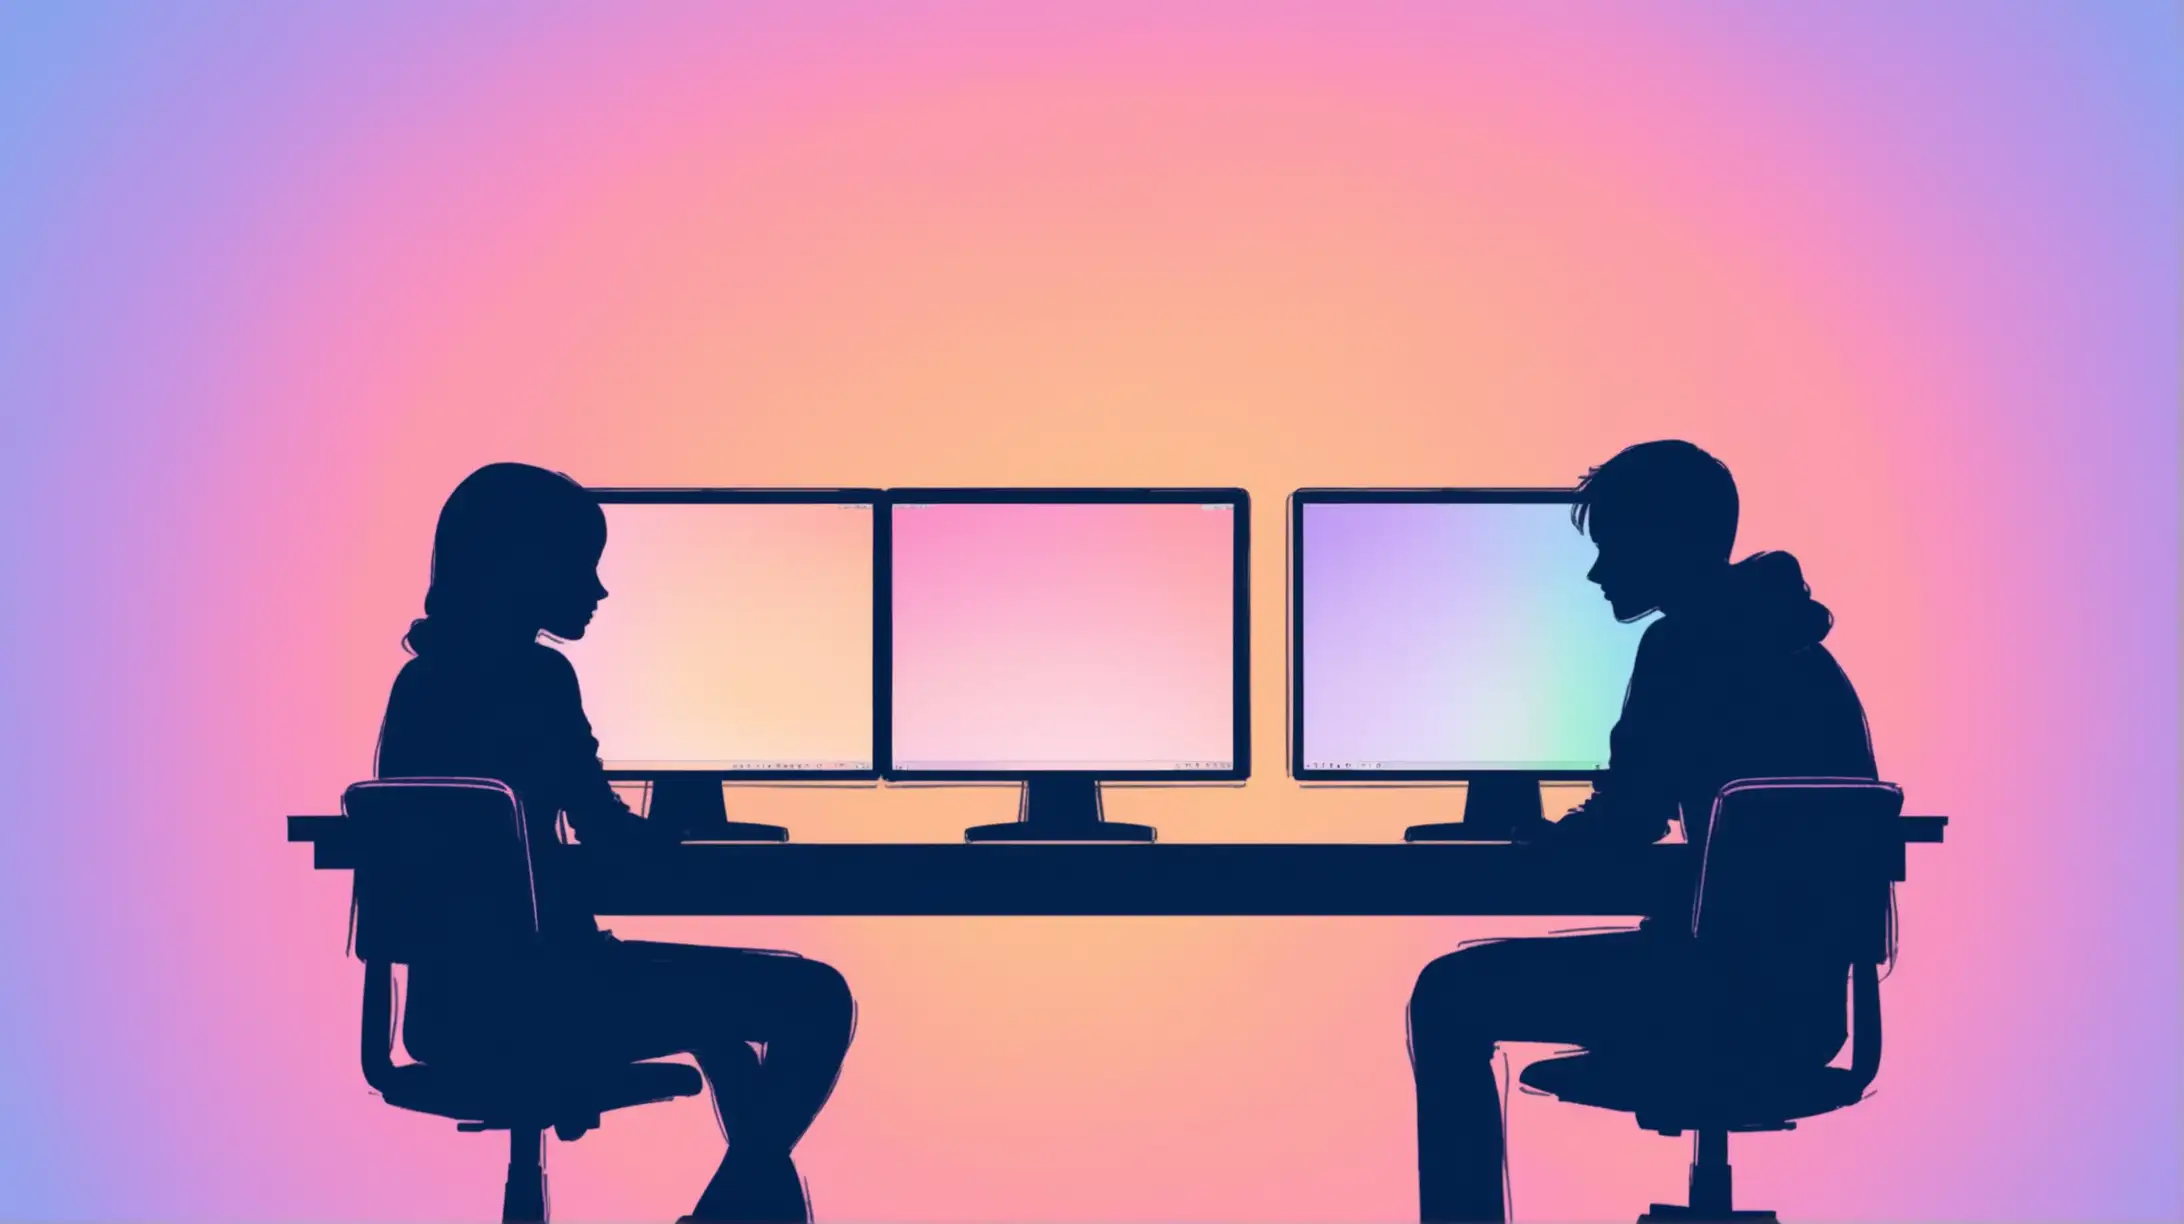 Generate an image of two people on a desk looking over a computer. The people should be silhouettes not detailed. It should look like one of them is showing the other how to use the computer. Colors should be pastel and vibrant. 